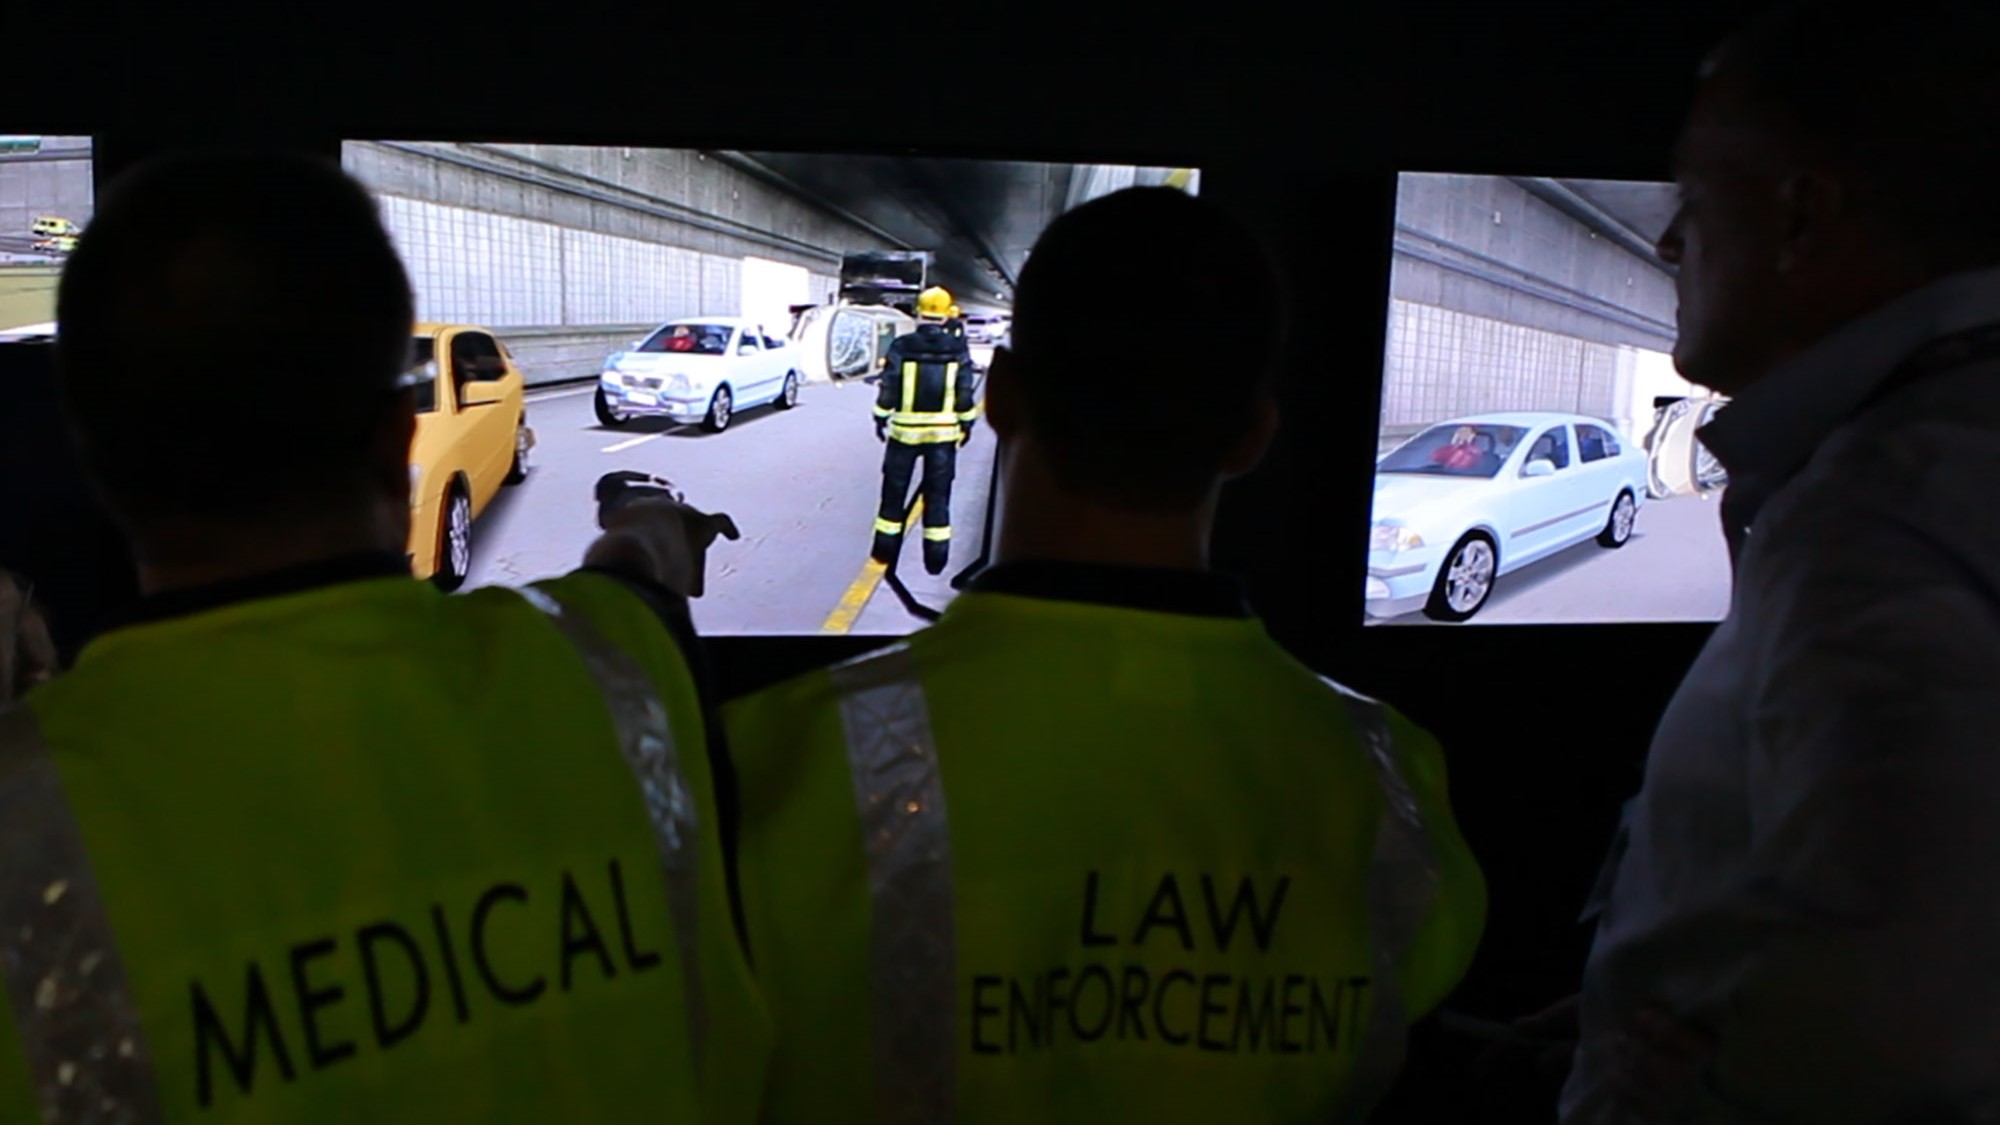 Medical and Law Enforcement trainees cooperating on a simulated traffic accident inside the tunnel.